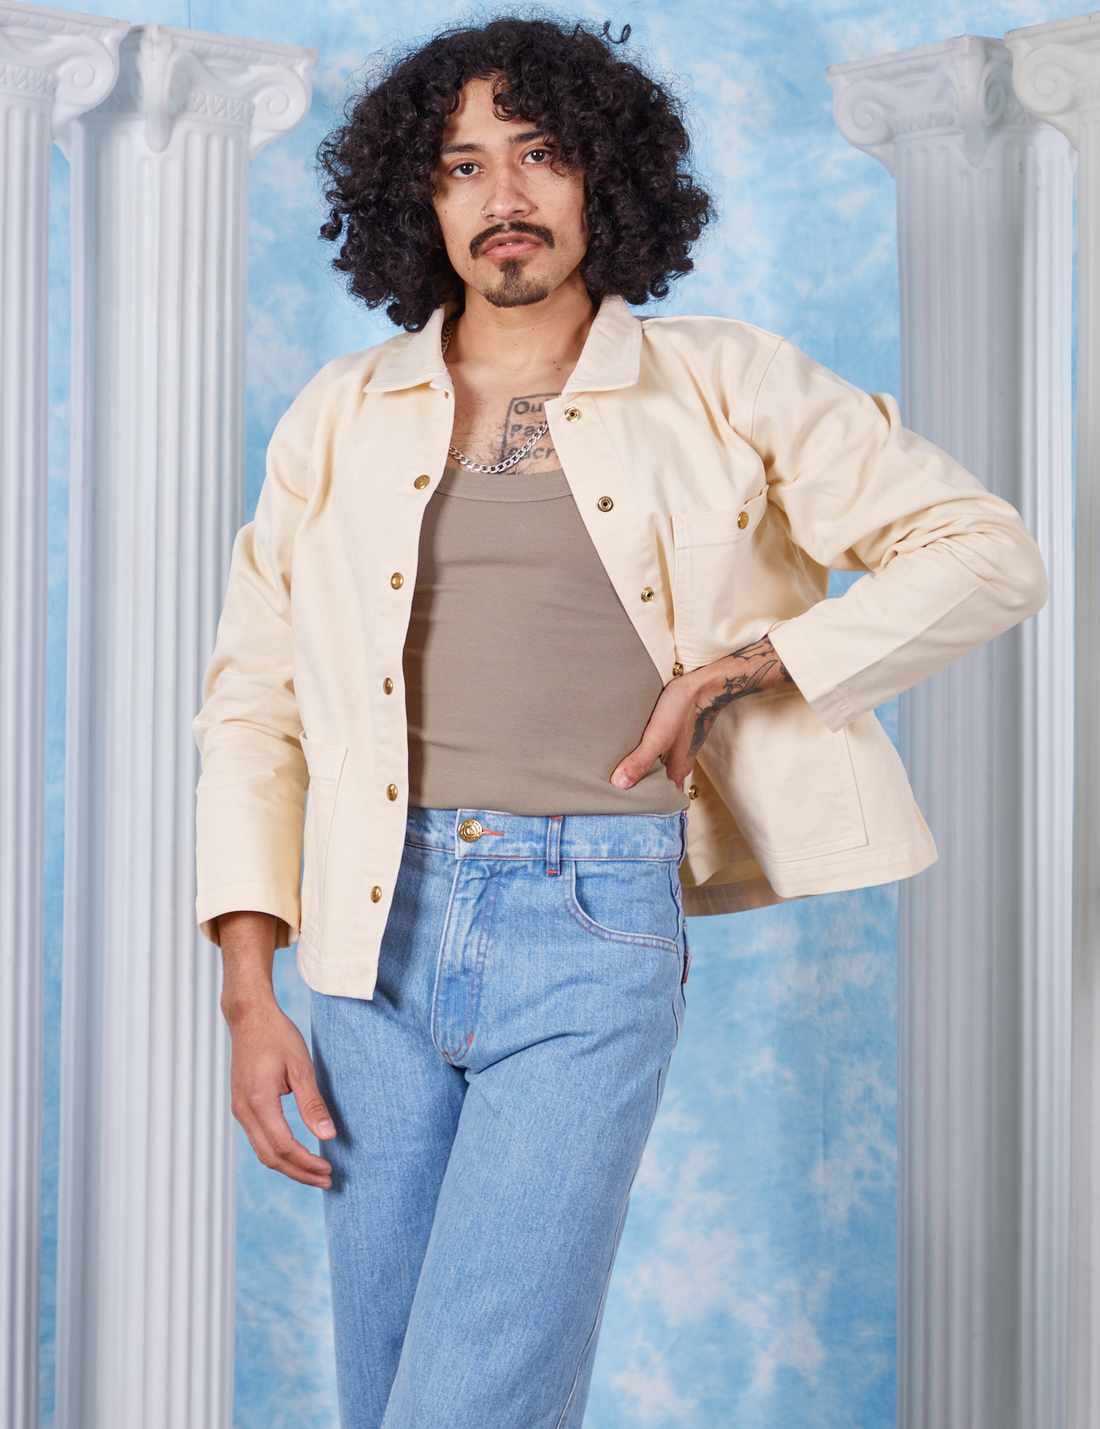 Jesse is wearing size S Vintage off-white David Neoclassical Work Jacket paired with khaki grey Tank Top underneath